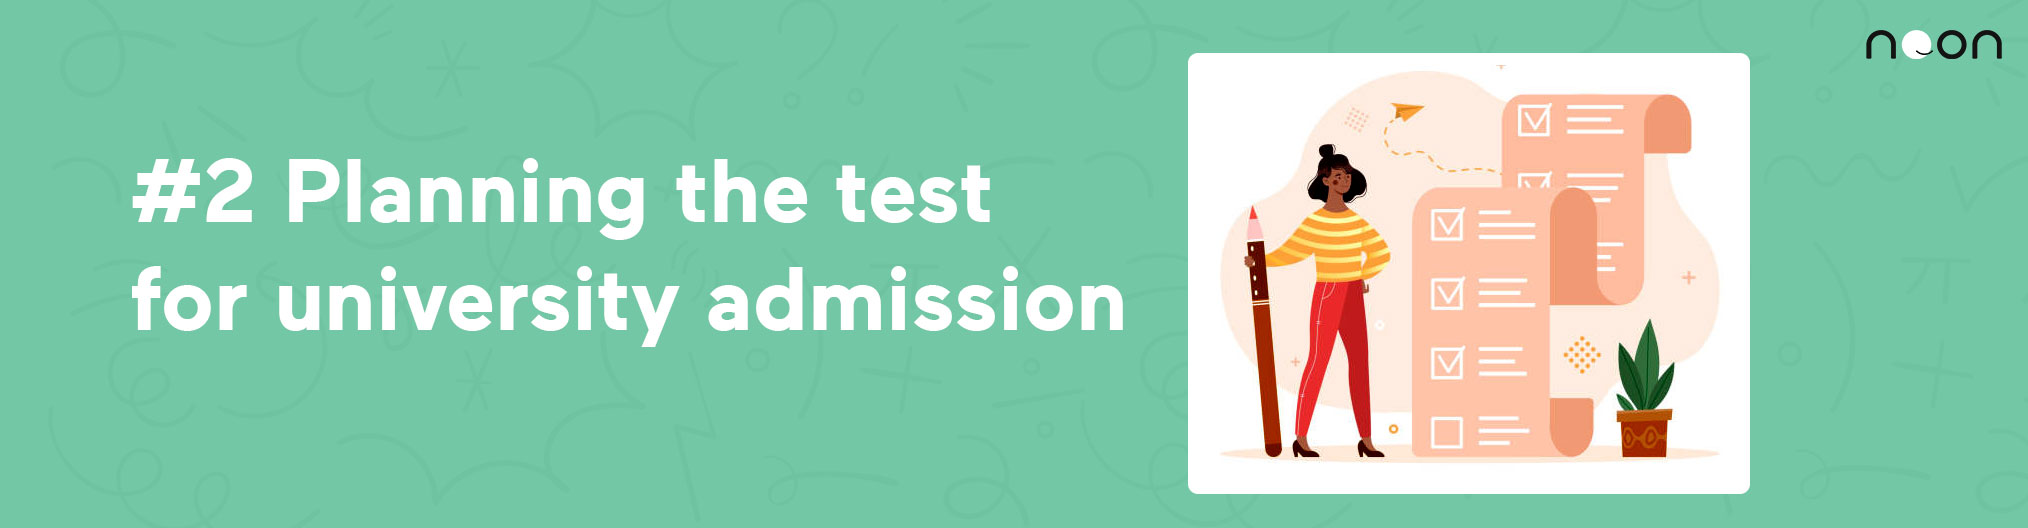 Planning the test for university admission